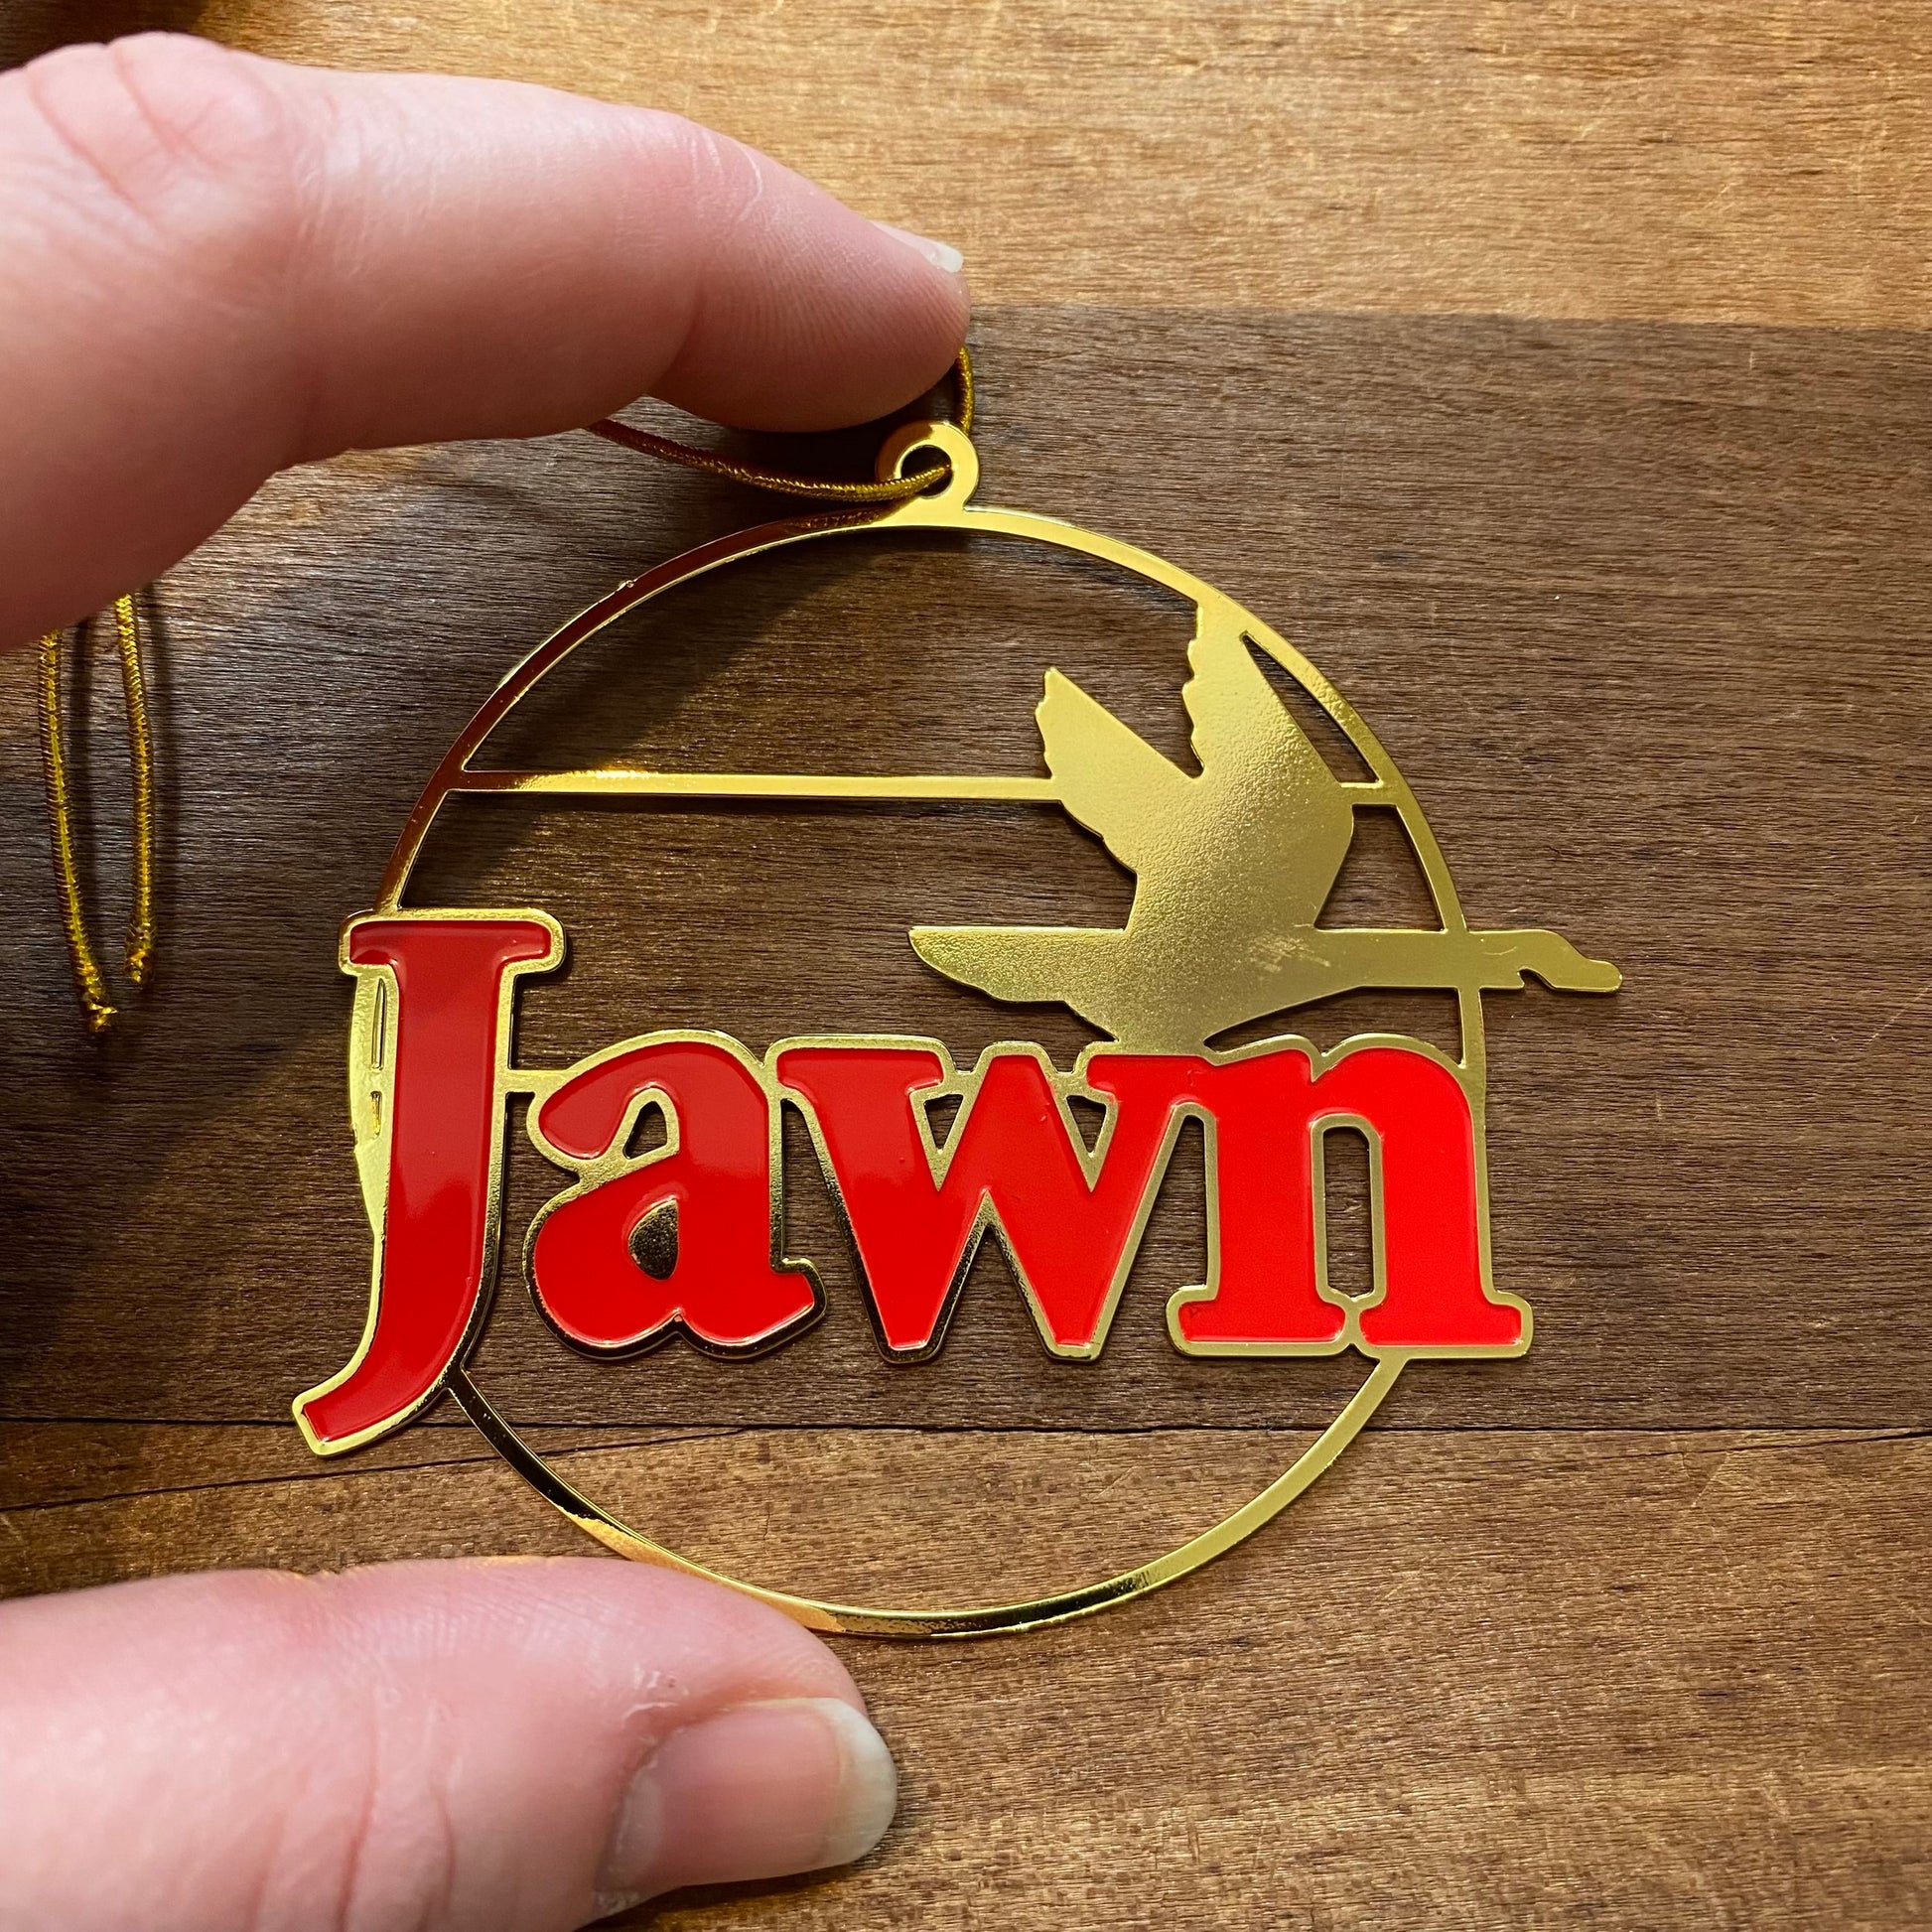 Gold and red South Fellini Jawn Ornament reading "jawn" with a silhouette of a plane, held by a person against a wooden background.